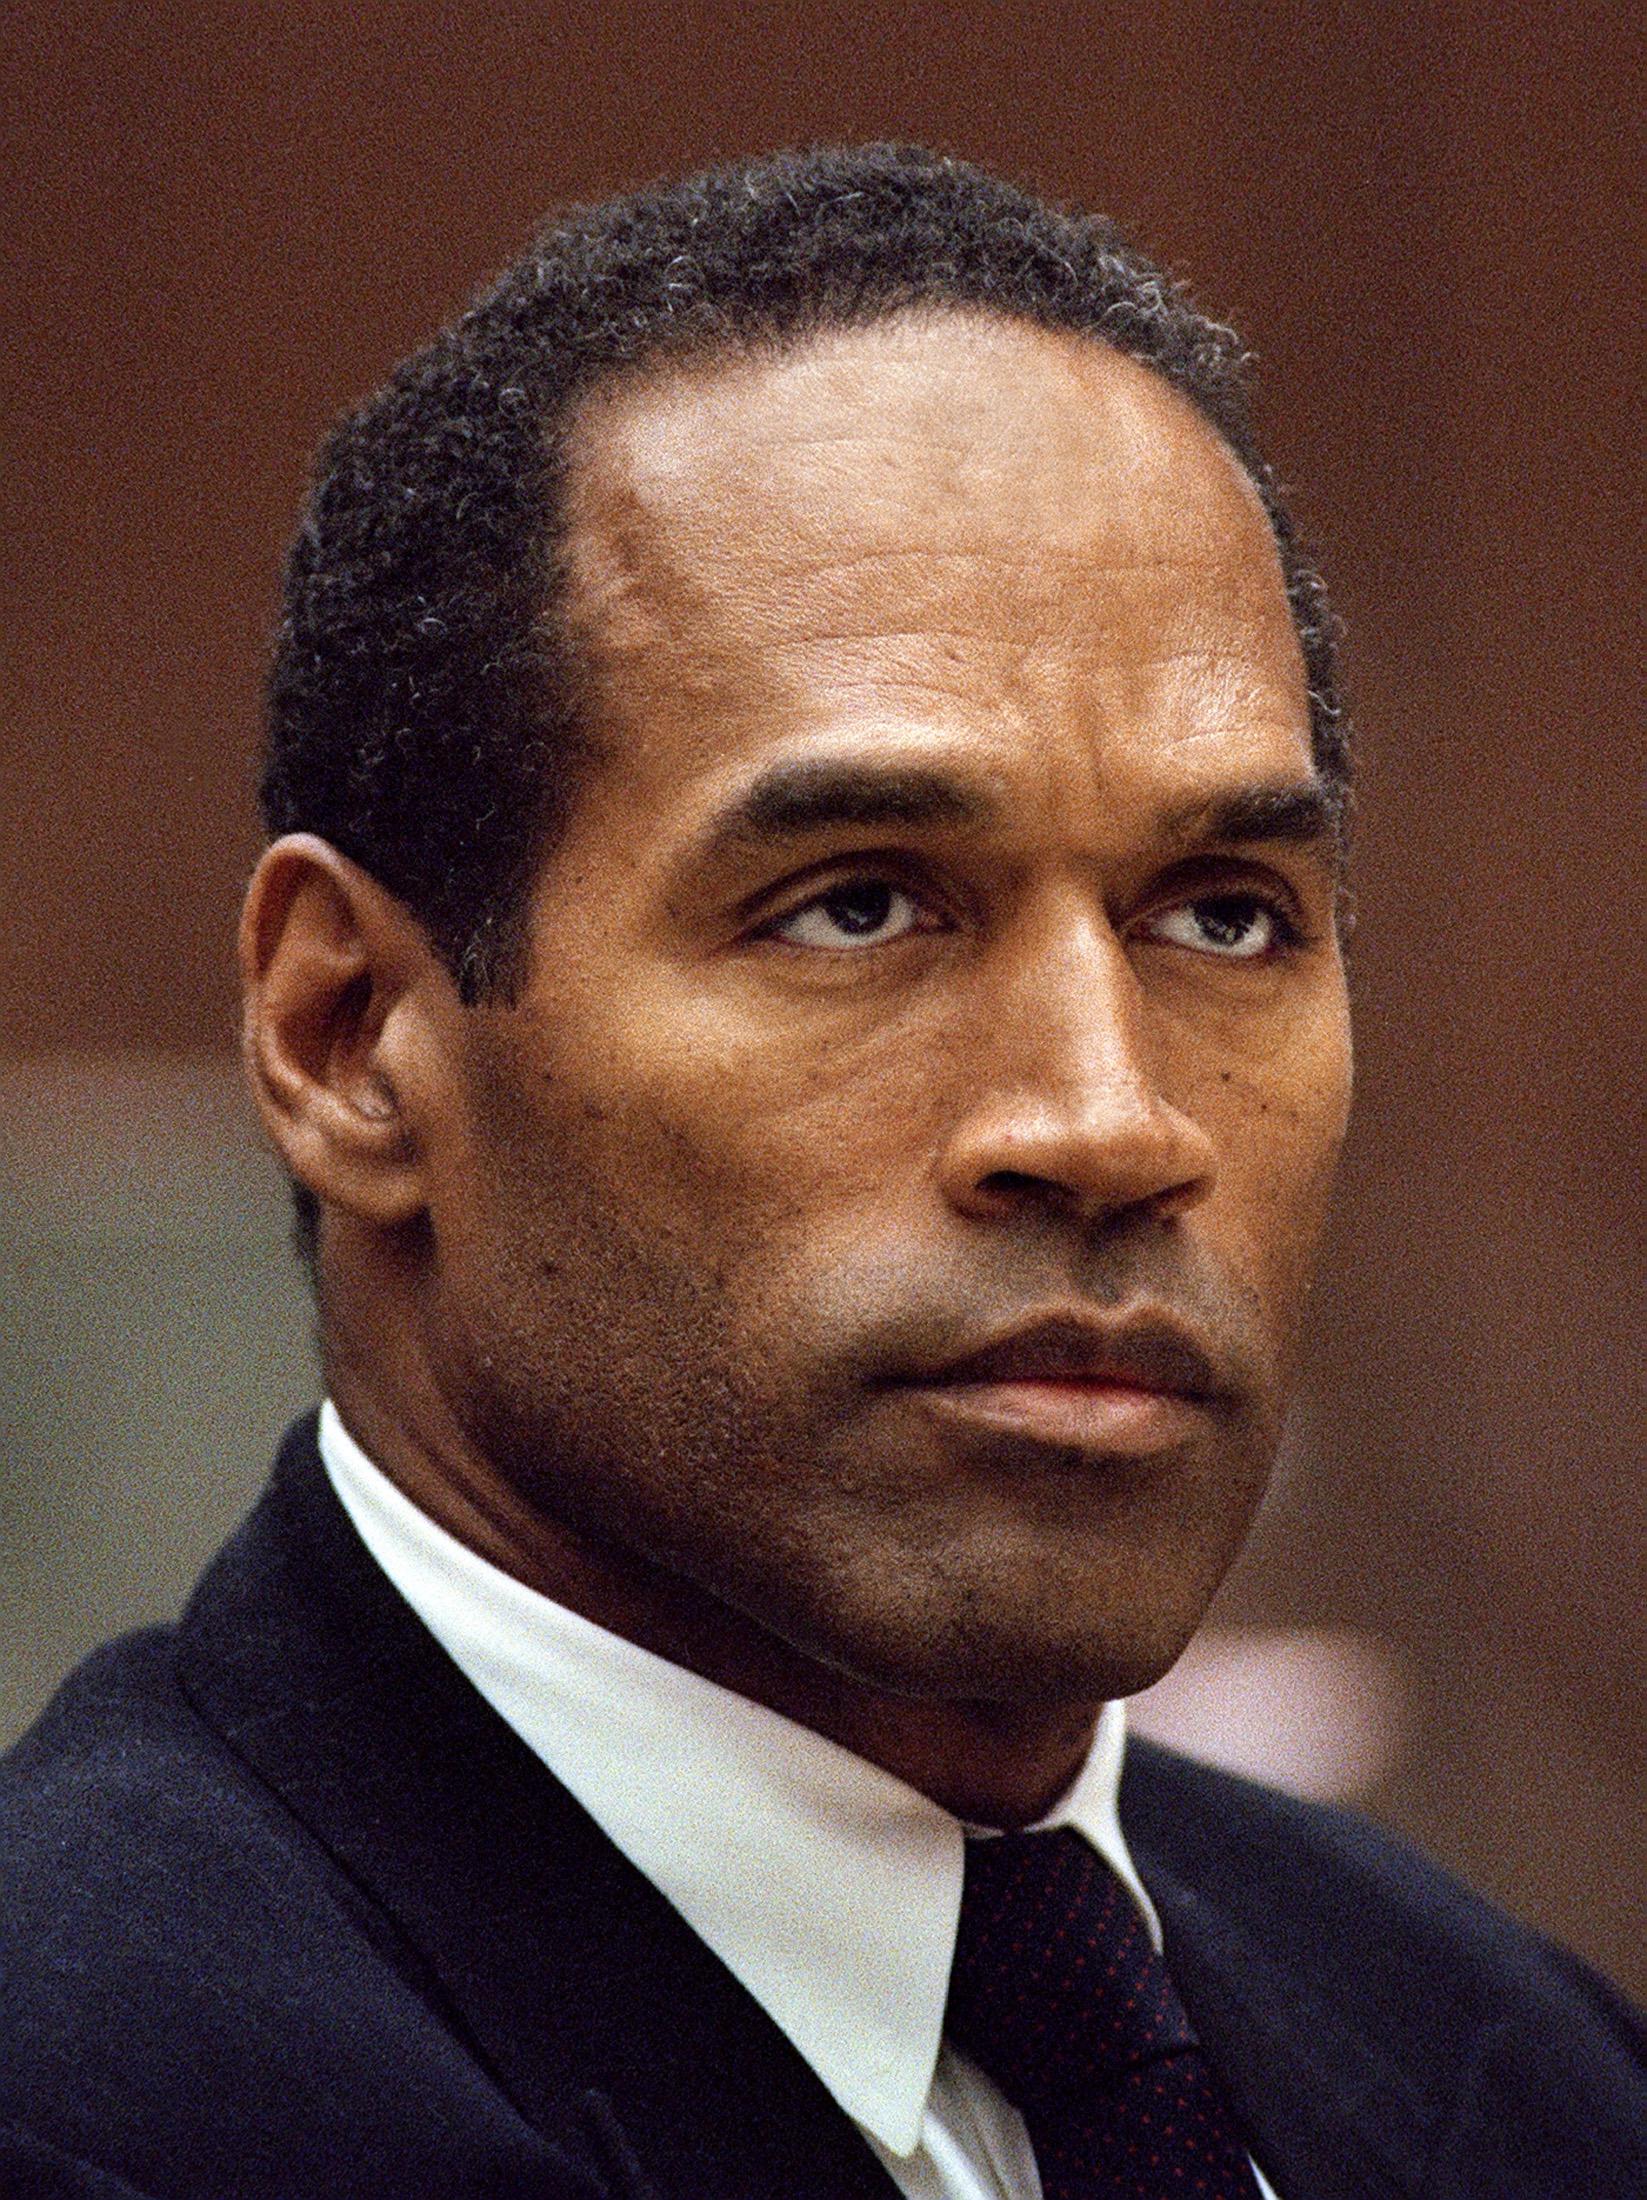 America's Crime Story - Filming The FX Show About The O.J. Simpson ...